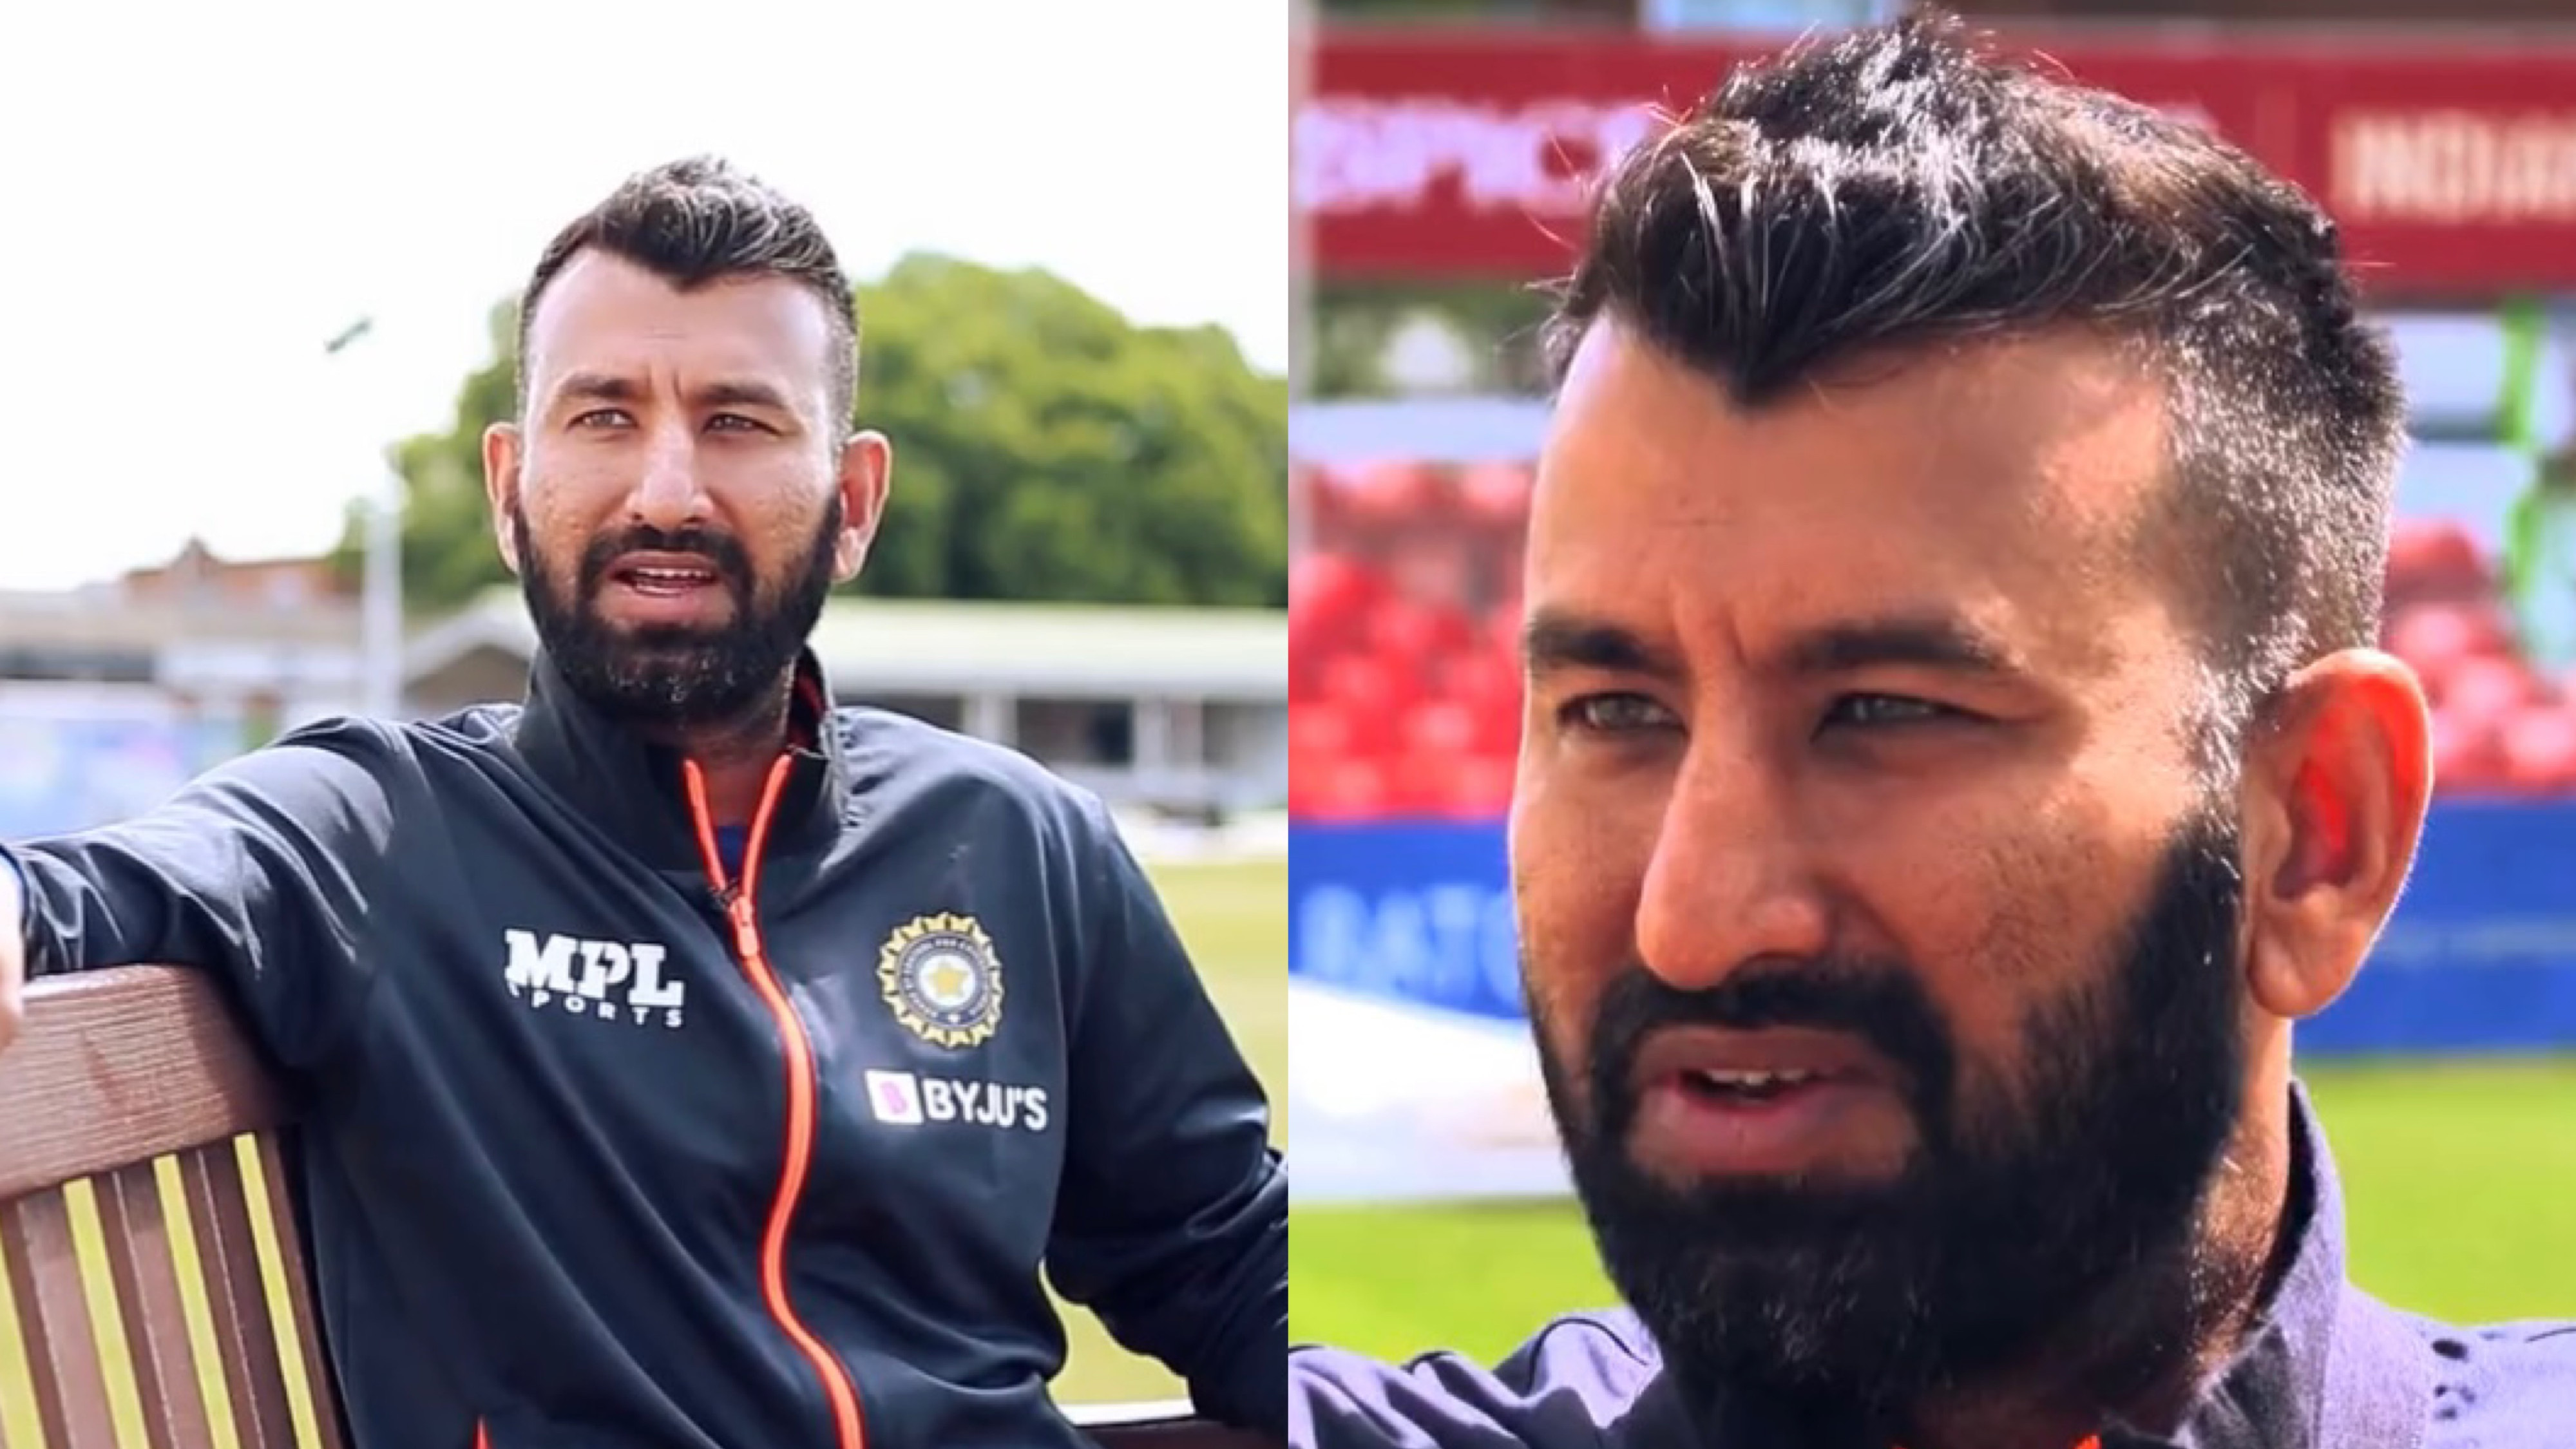 WATCH - “I knew that everything is back to normal now”: Cheteshwar Pujara recalls his comeback story